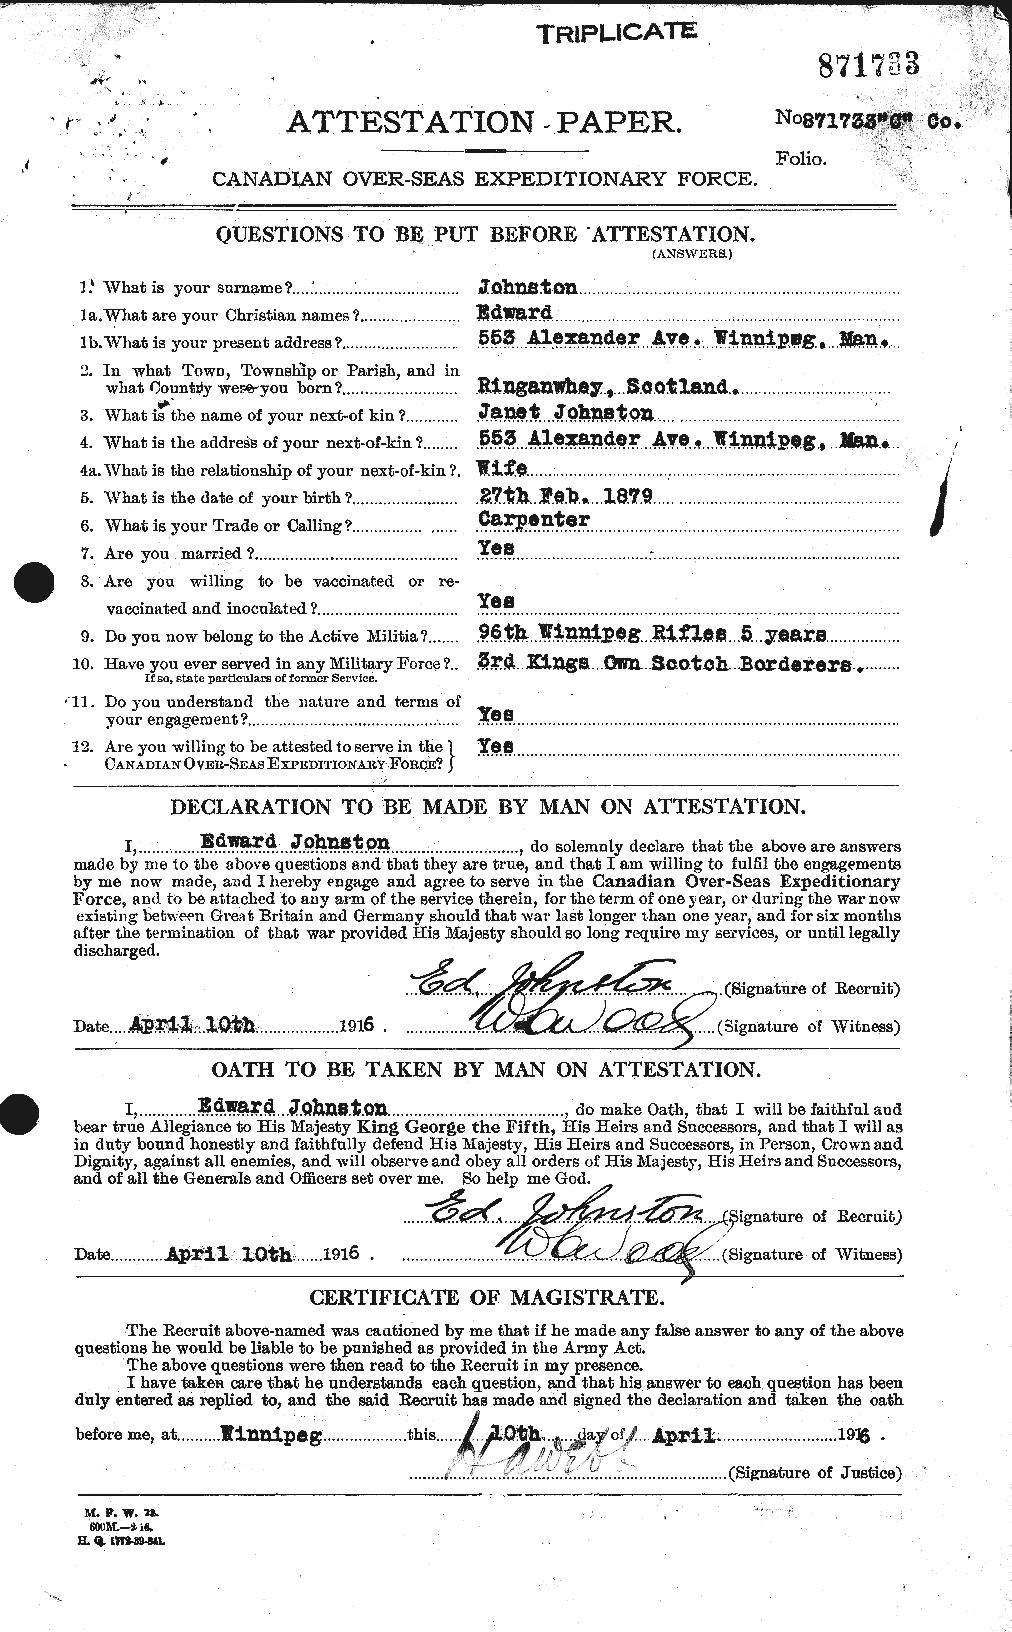 Personnel Records of the First World War - CEF 423221a